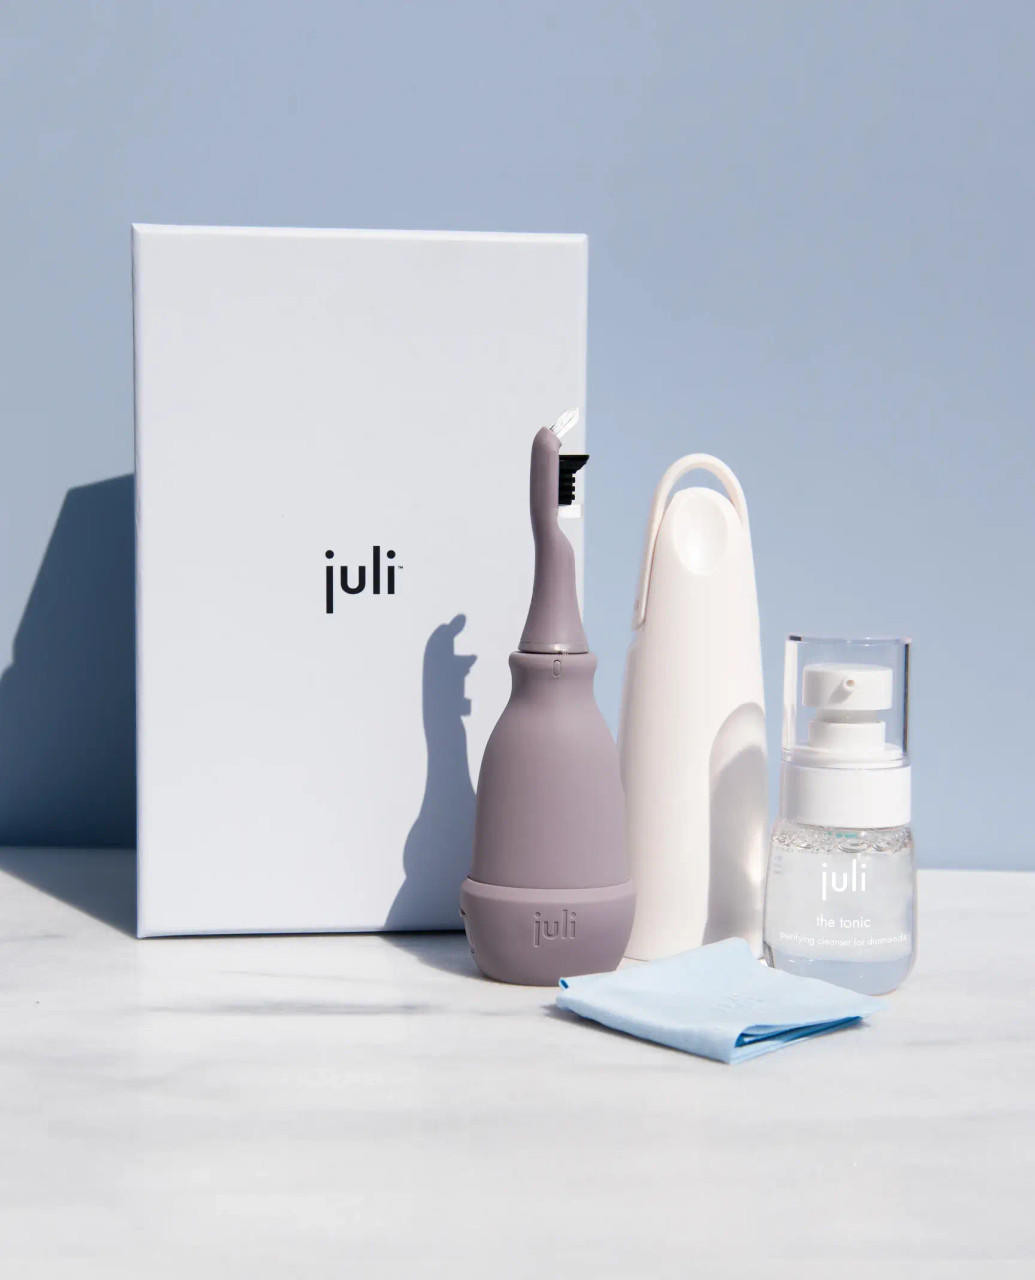 Juli At Home Jewelry Cleaner